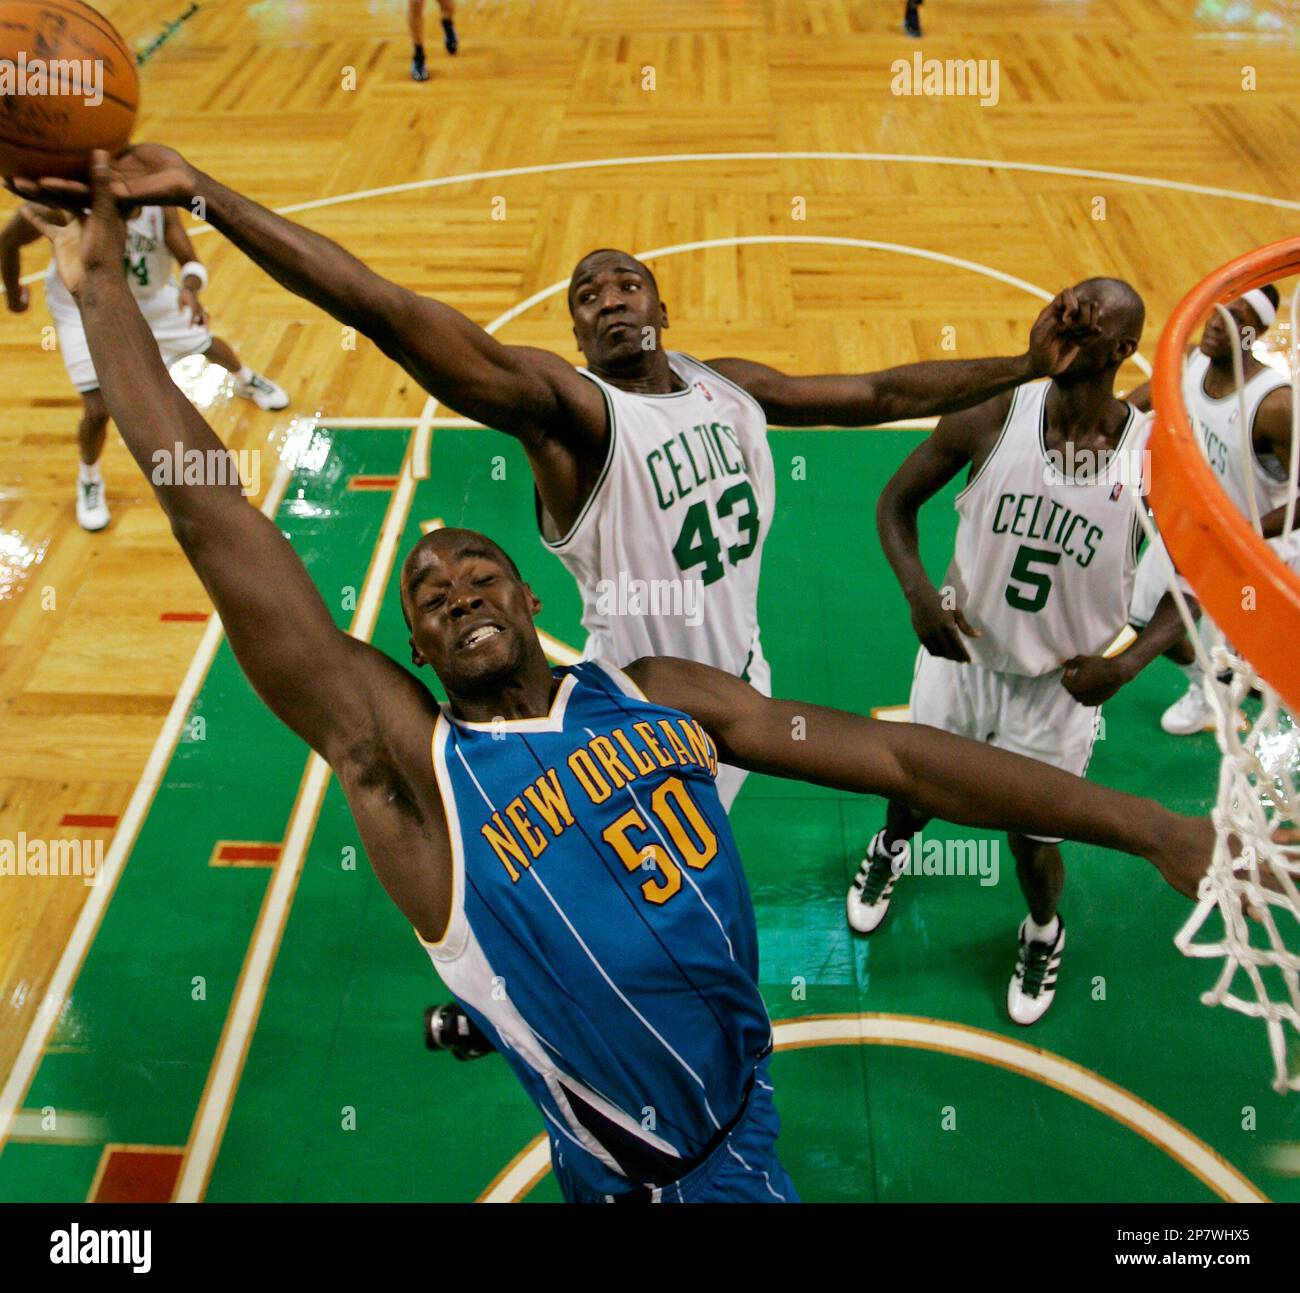 New Orleans Hornets center Emeka Okafor (50) and Boston Celtics center Kendrick Perkins (43) battle for a rebound during the second half of Boston's 97-87 win in a NBA basketball game in Boston Sunday, Nov. 1, 2009. (AP Photo/Winslow Townson) Stock Photo